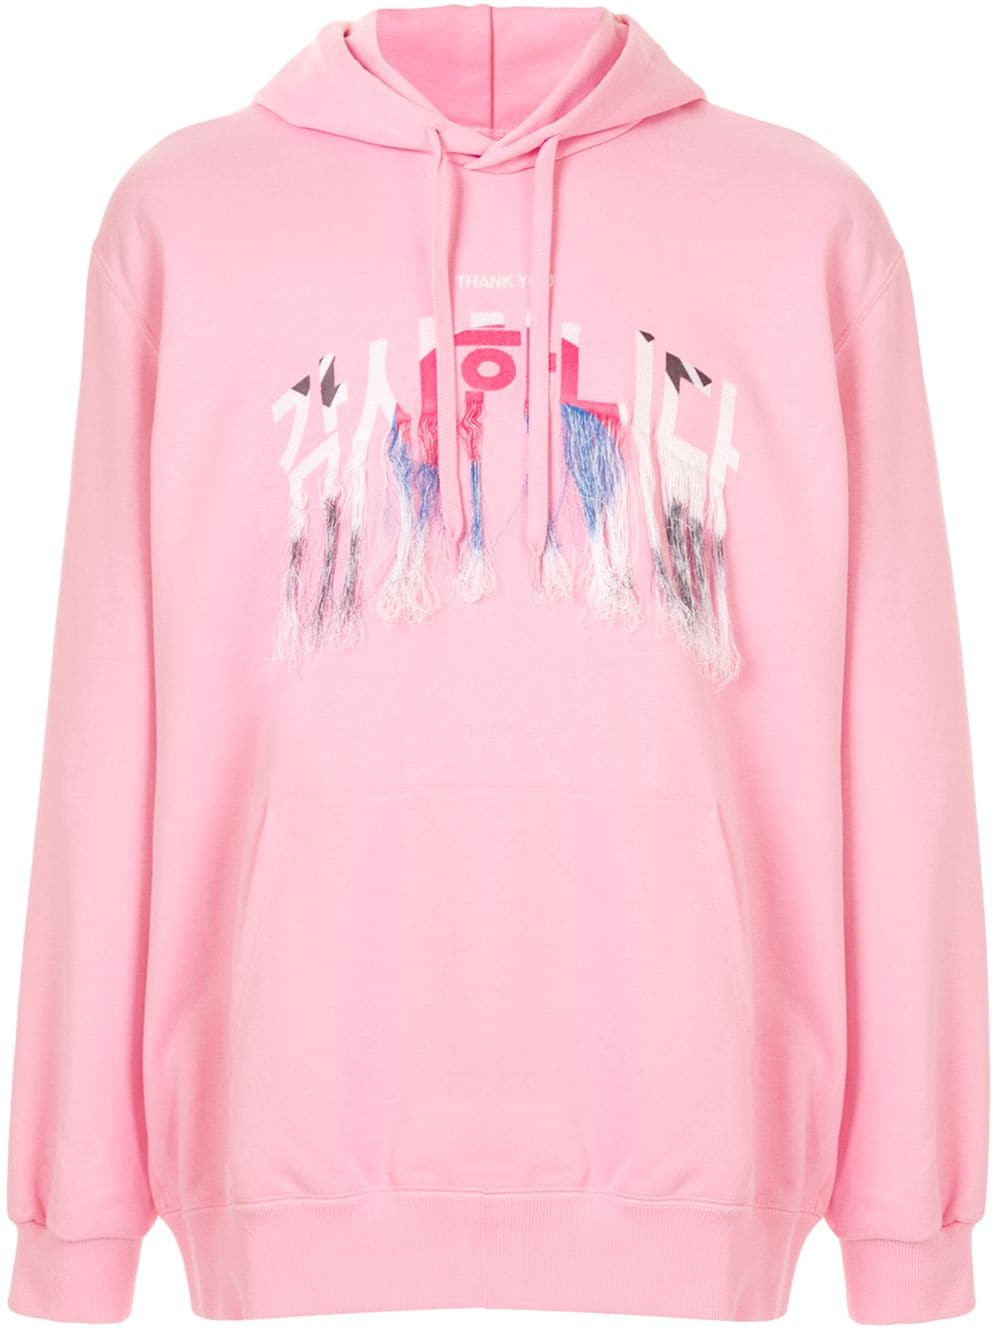 Doublet embroidered fringed hoodie - Pink von Doublet